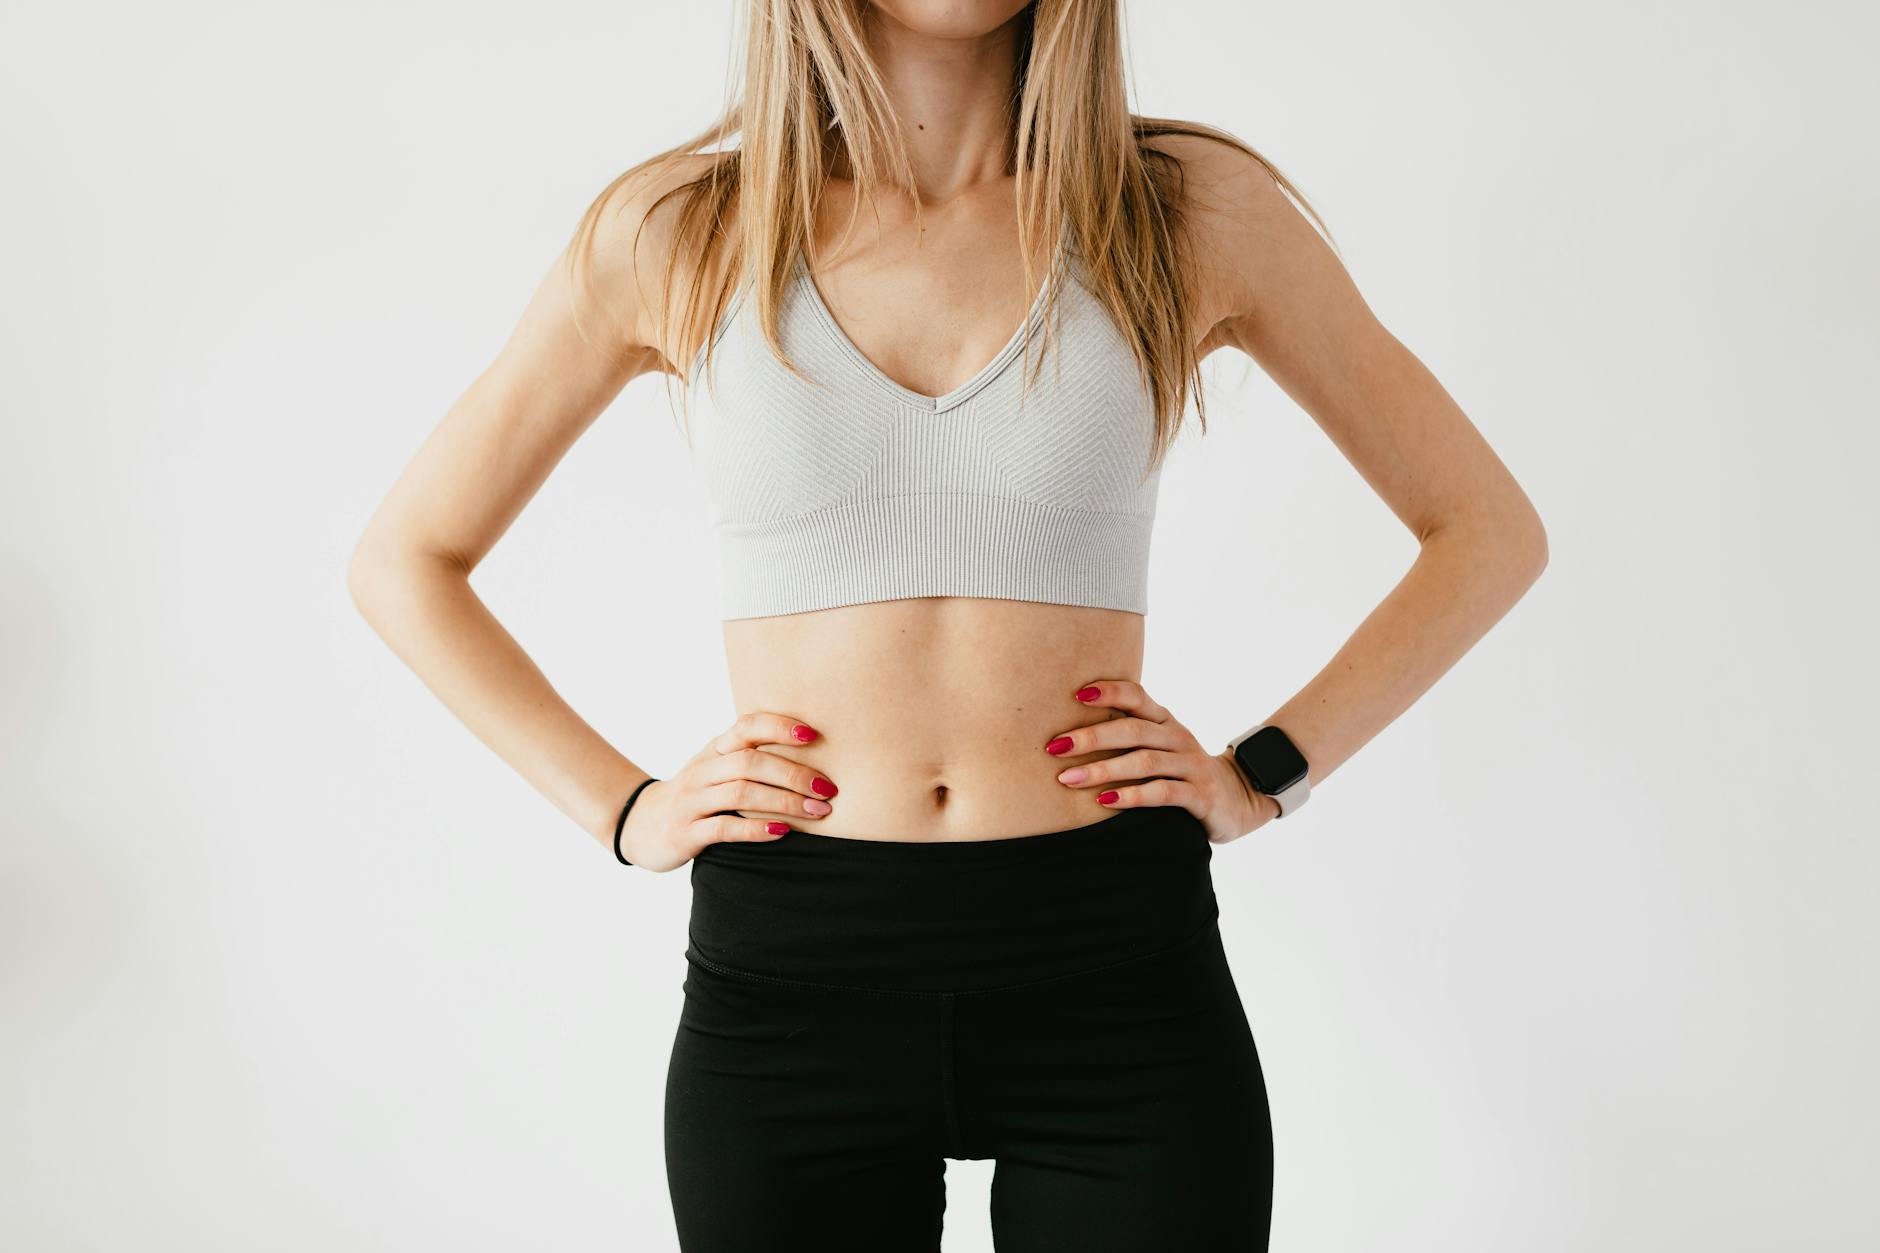 Faceless slim anonymous blond female in sports bra and black leggings in wearable bracelet showing perfect belly on white background while standing with hands on waist